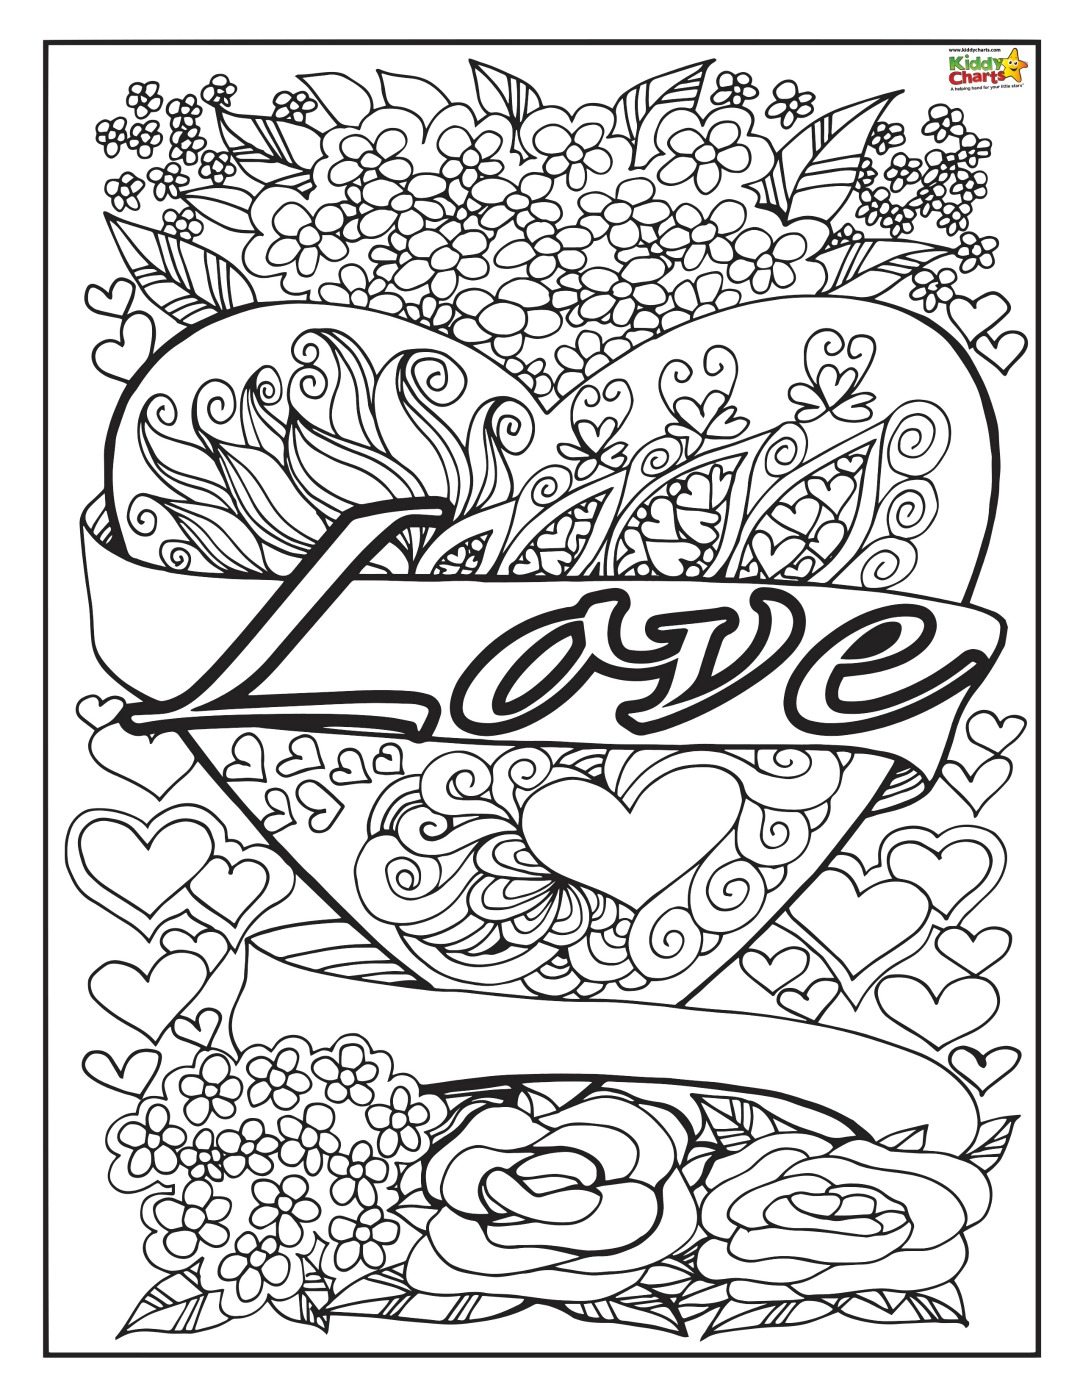 Some gorgeous love coloring pages for adults and kids, as part of our Kindness series of resources. Do check the other resource out on the site.